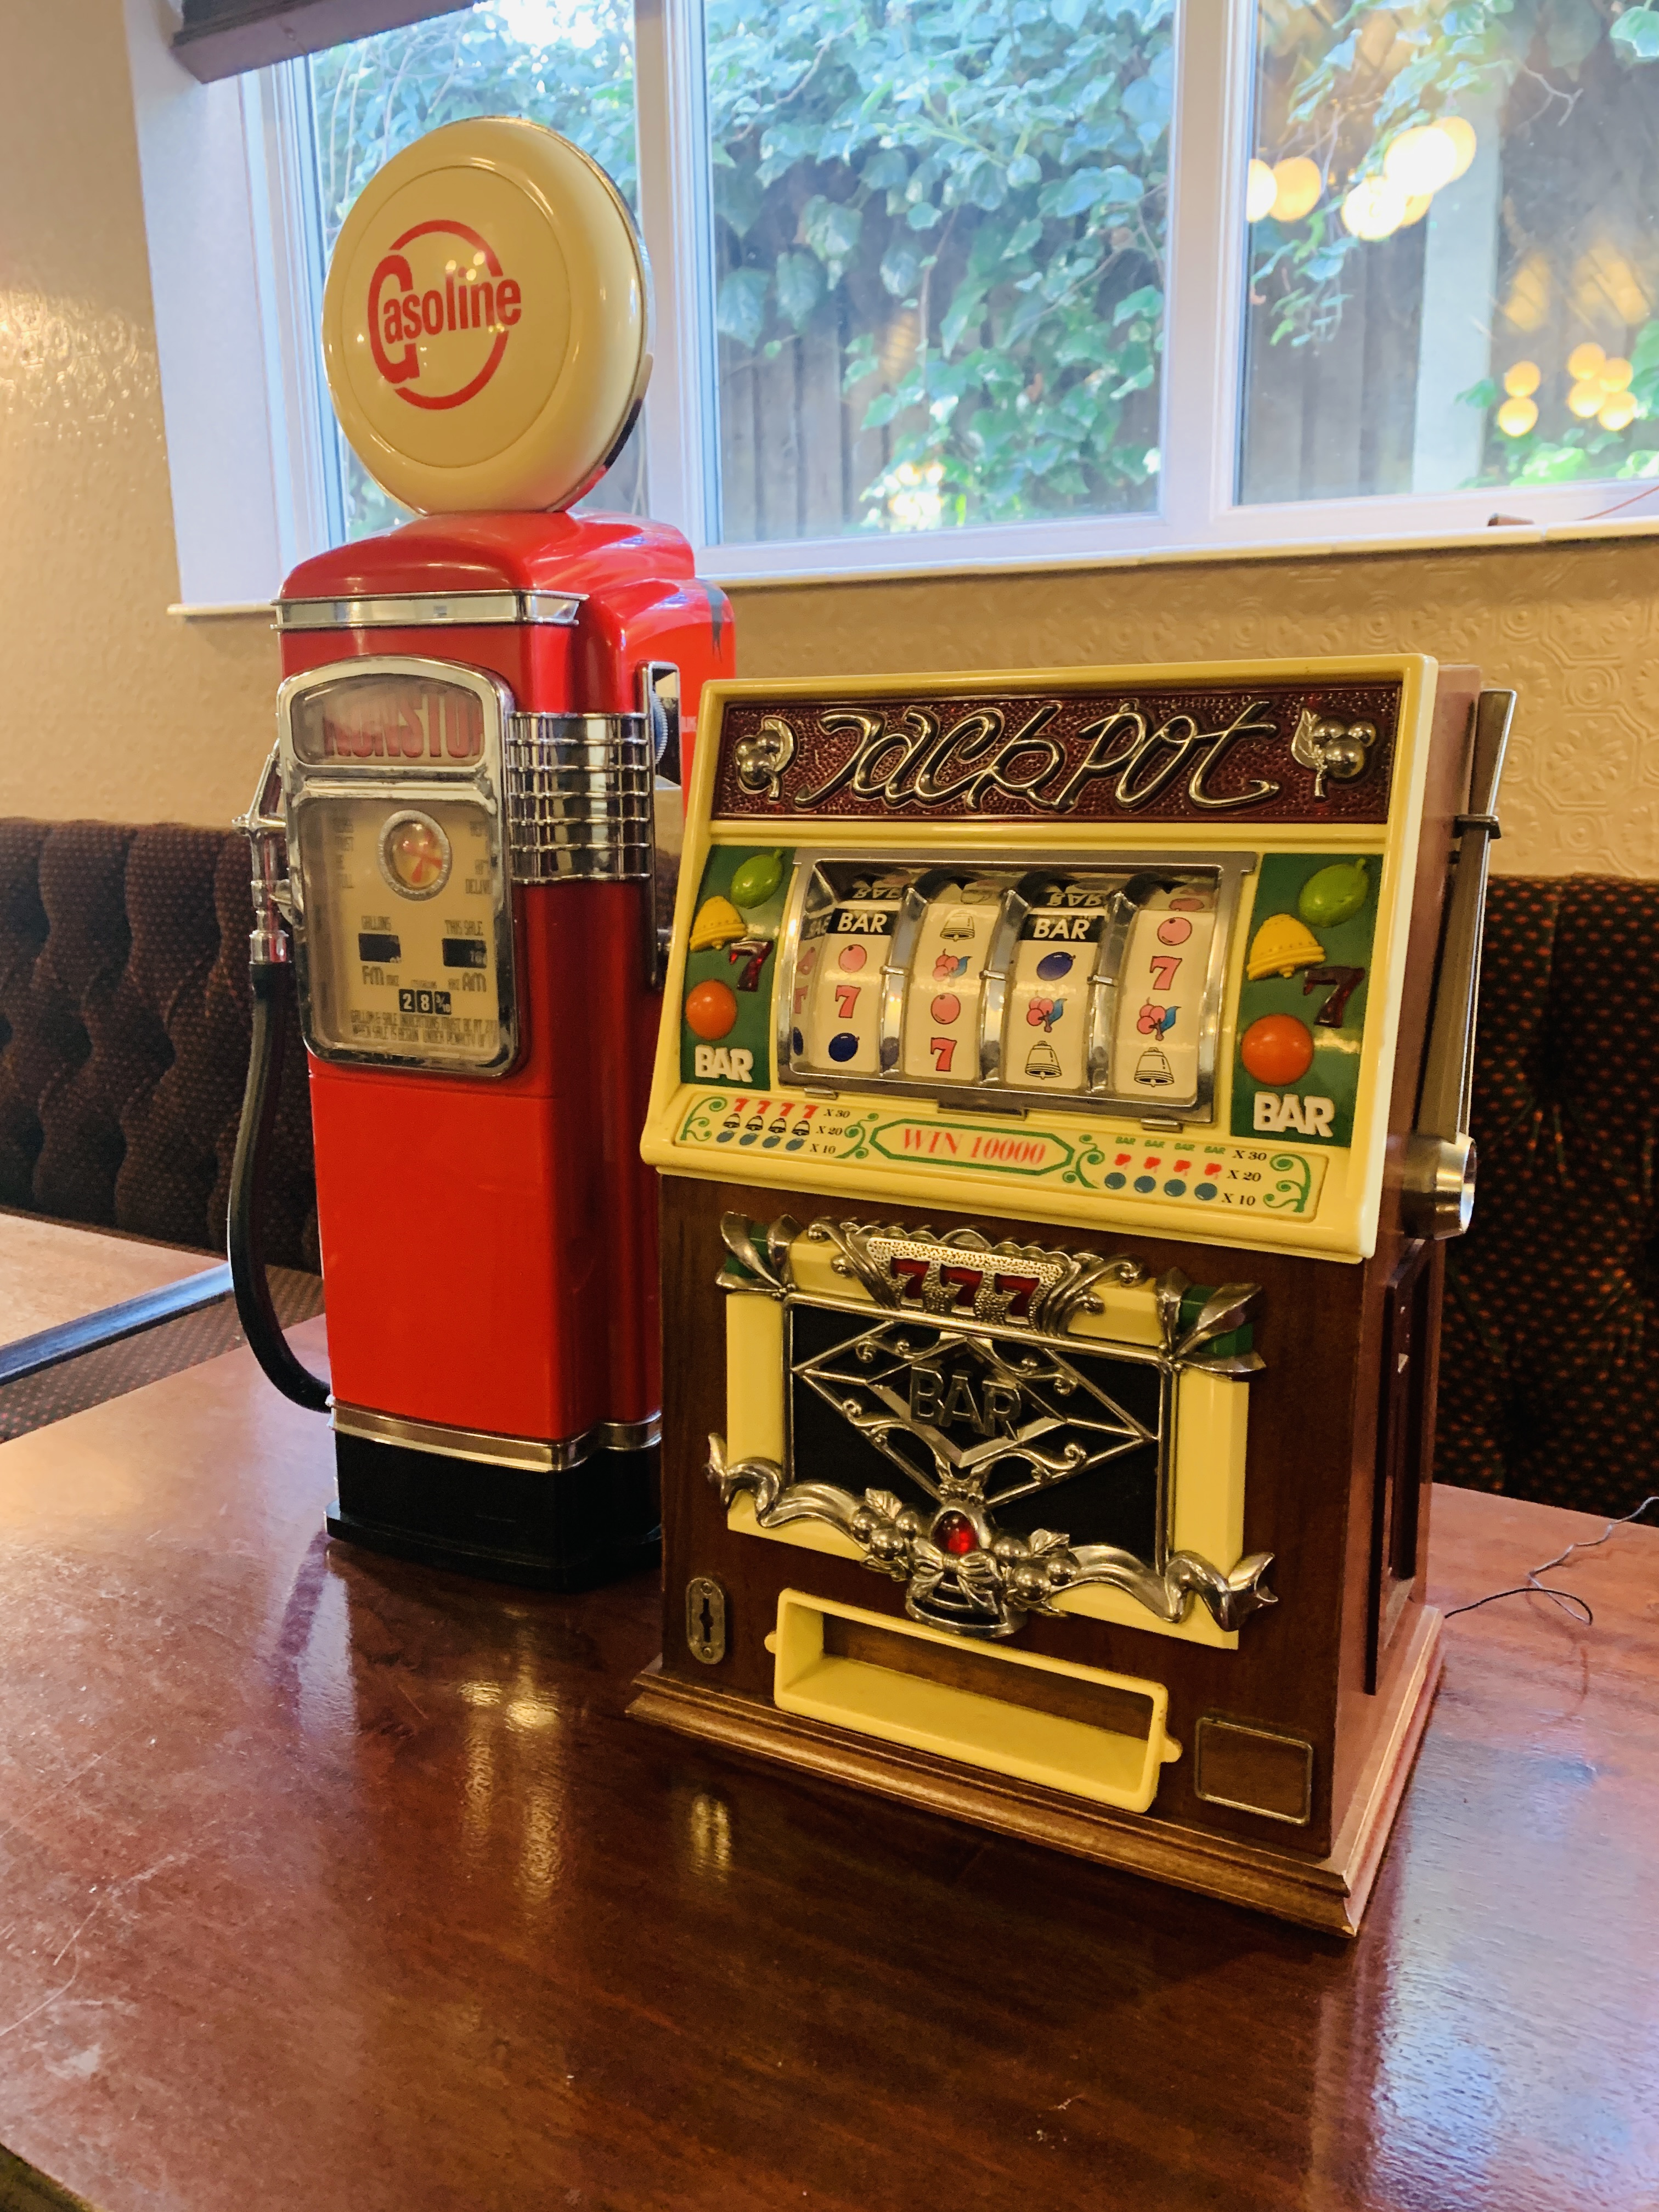 A REPRODUCTION NOVELTY RADIO FASHIONED AS "GAS PUMP" - HEIGHT 60CM AND REPRODUCTION NOVELTY RADIO